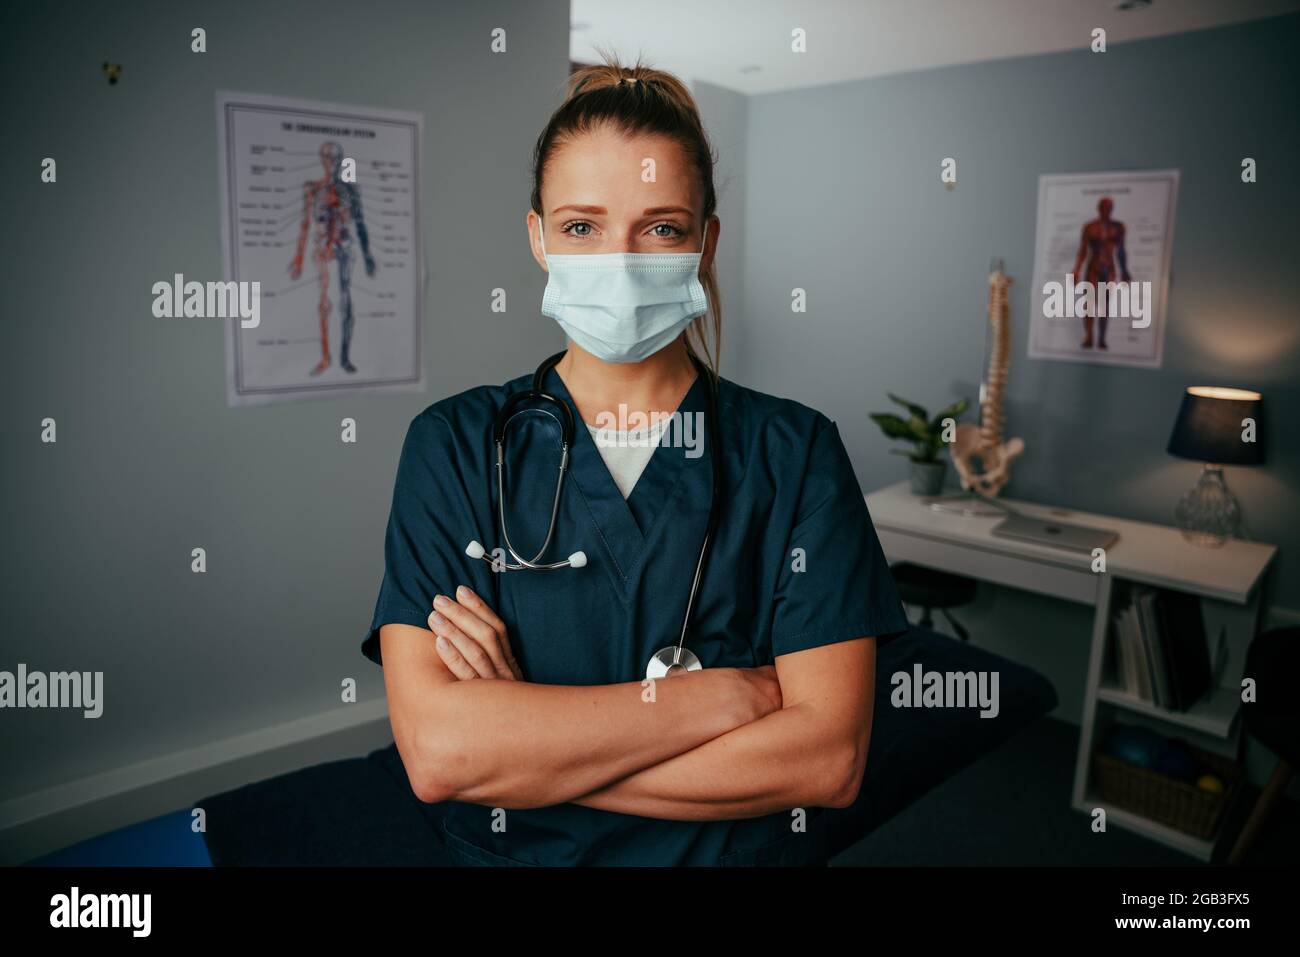 Caucasian female nurse standing in doctors office wearing surgical mask Stock Photo